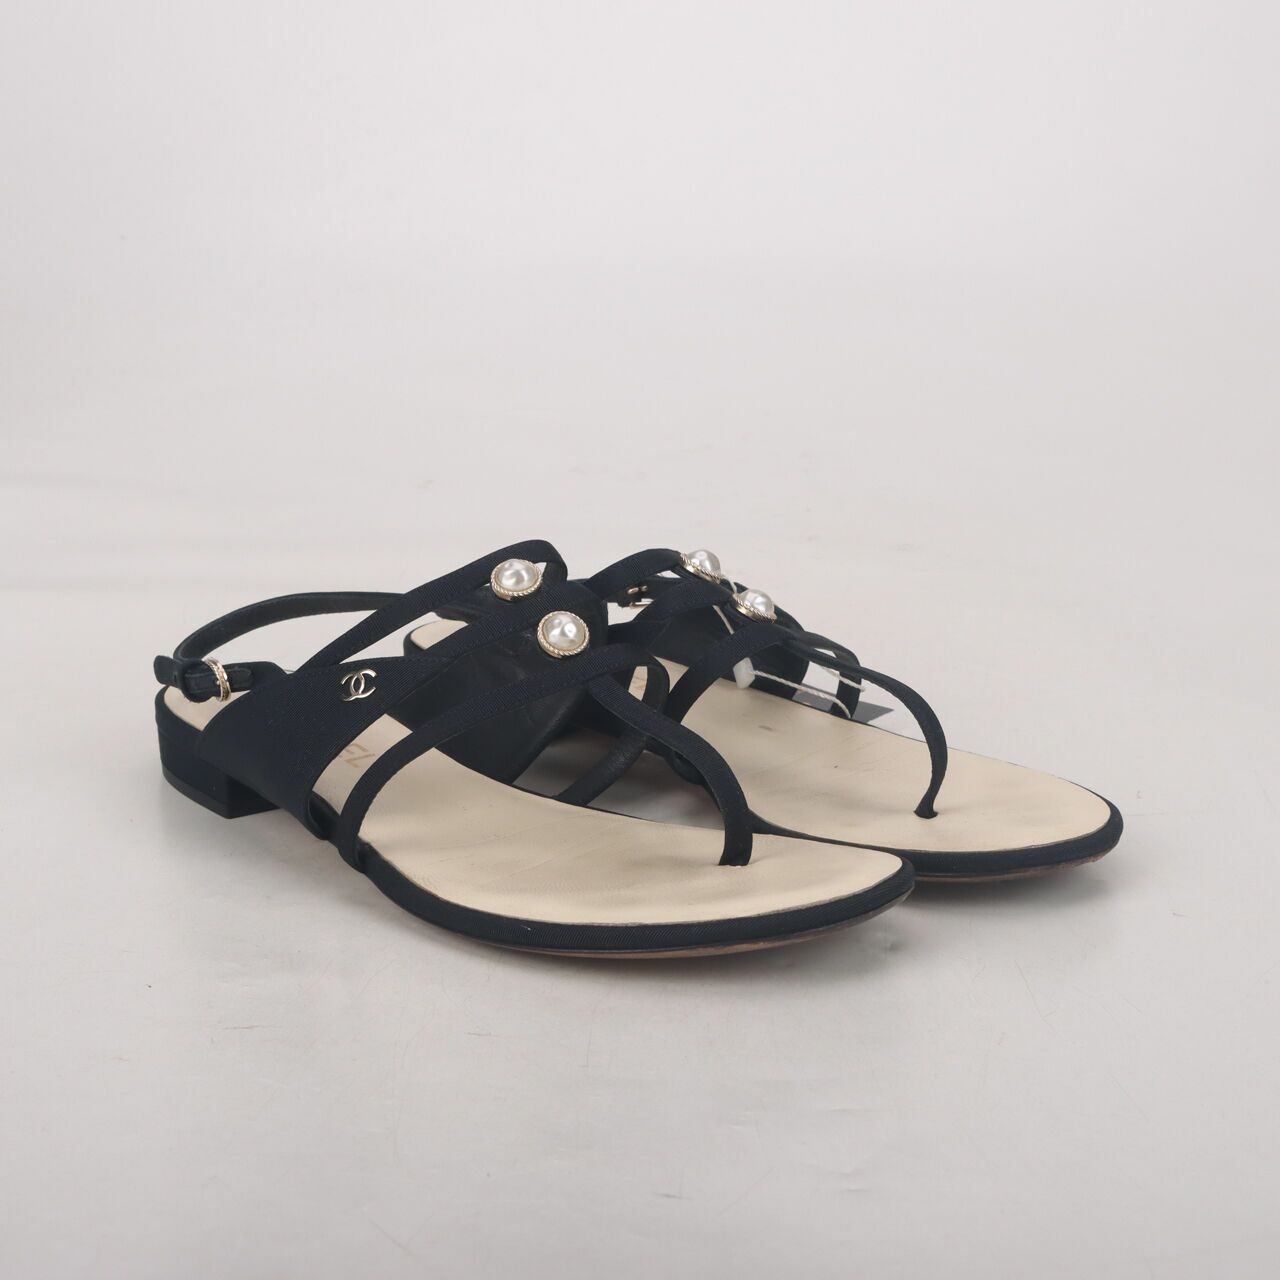 Chanel Grosgrain Black With Pearl Sandals